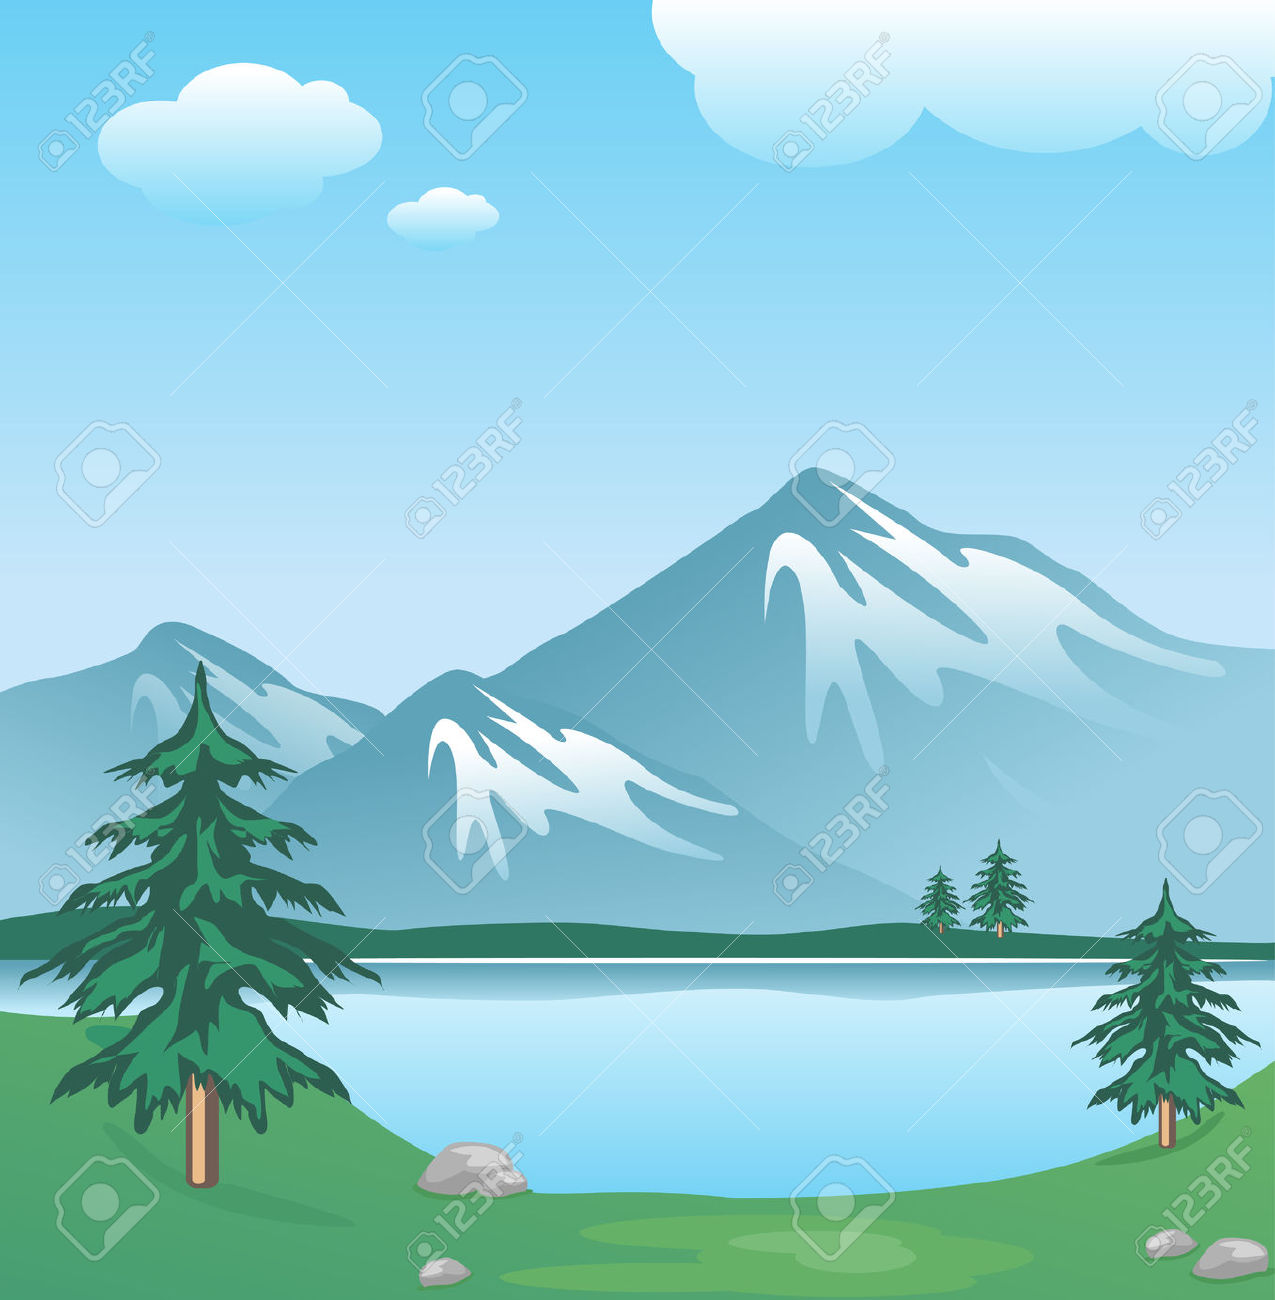 Free Lake Clipart Pictures - Clipartix